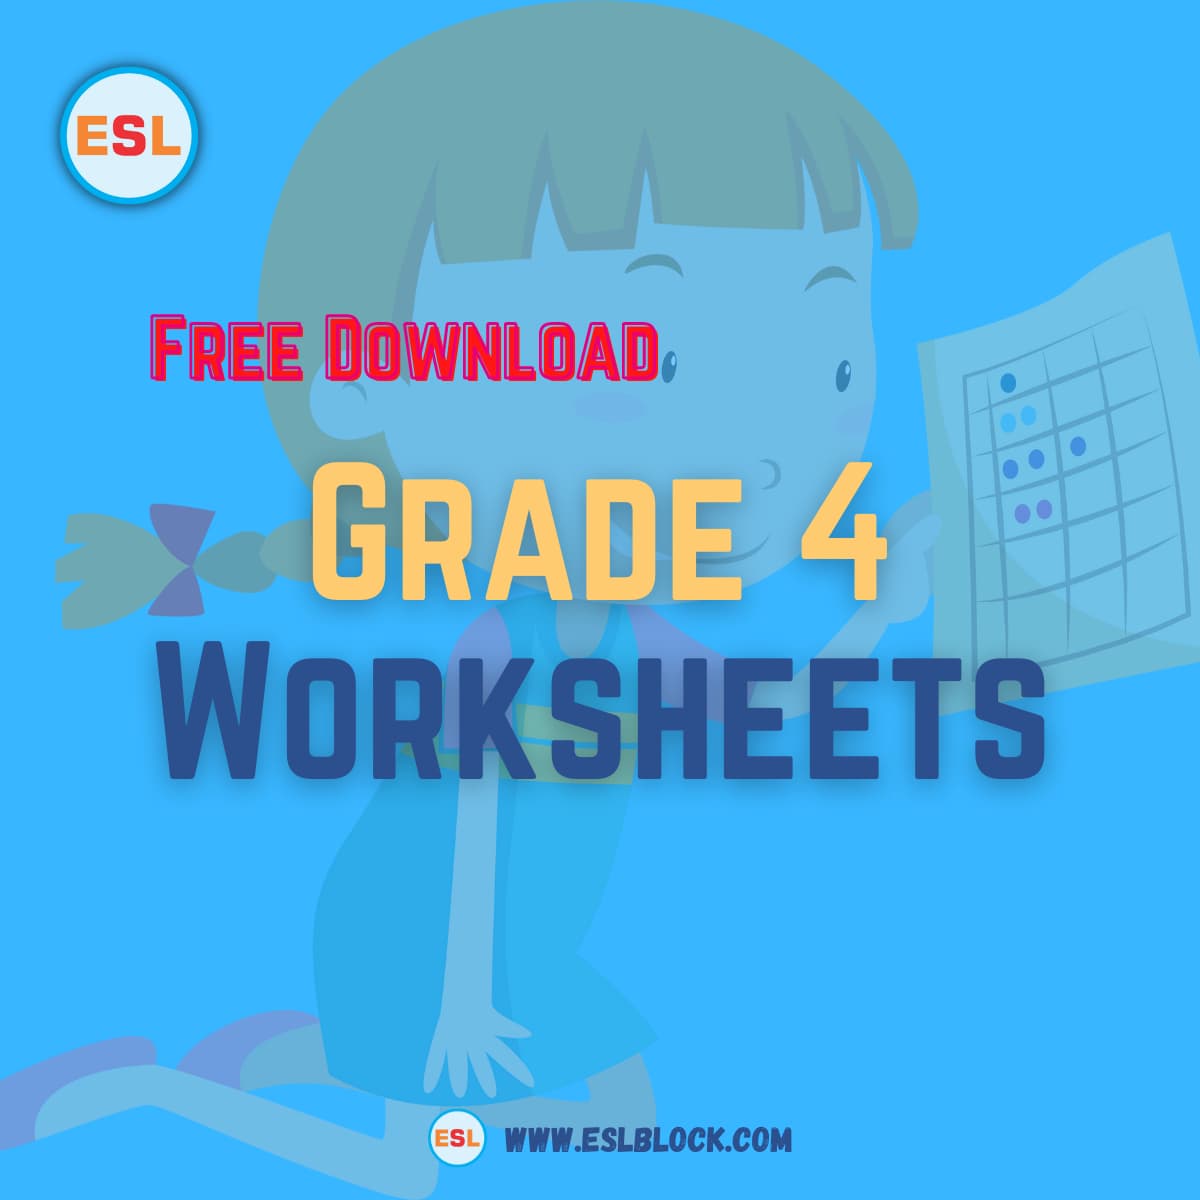 4th grade worksheets are an important resource for students who are continuing to build their foundational skills and knowledge.